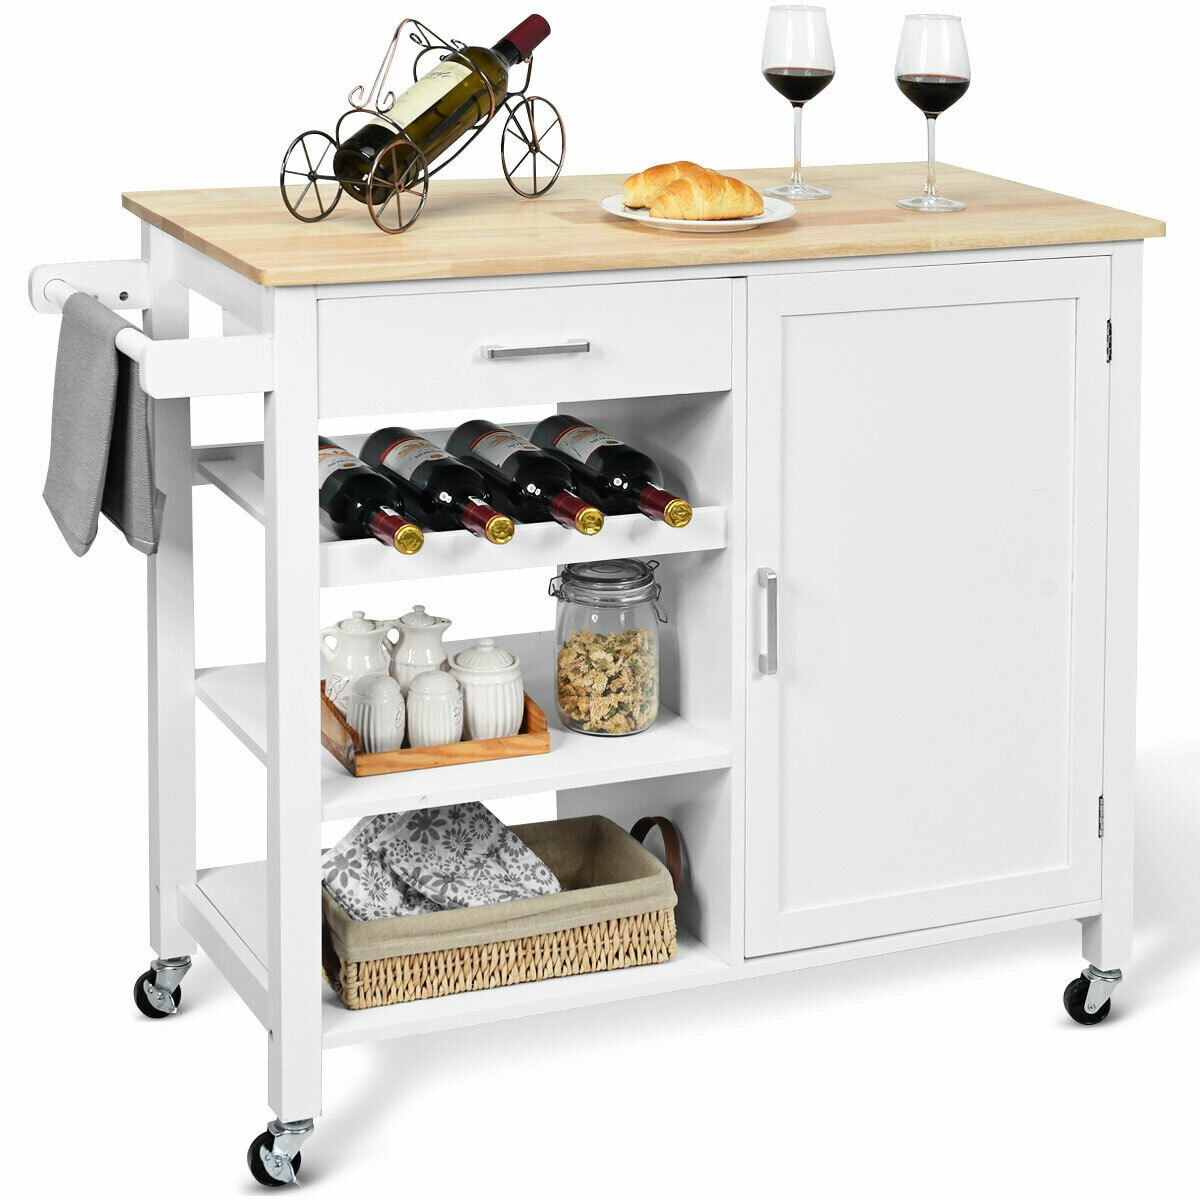 Wheeled Wooden Kitchen Island with a Shelf for Plates and Wine Bottle Rack Relaxdays JAMES Bamboo Serving Trolley Cart with 2 Drawers and 3 Baskets Natural 80 x 67 x 37 cm XXL